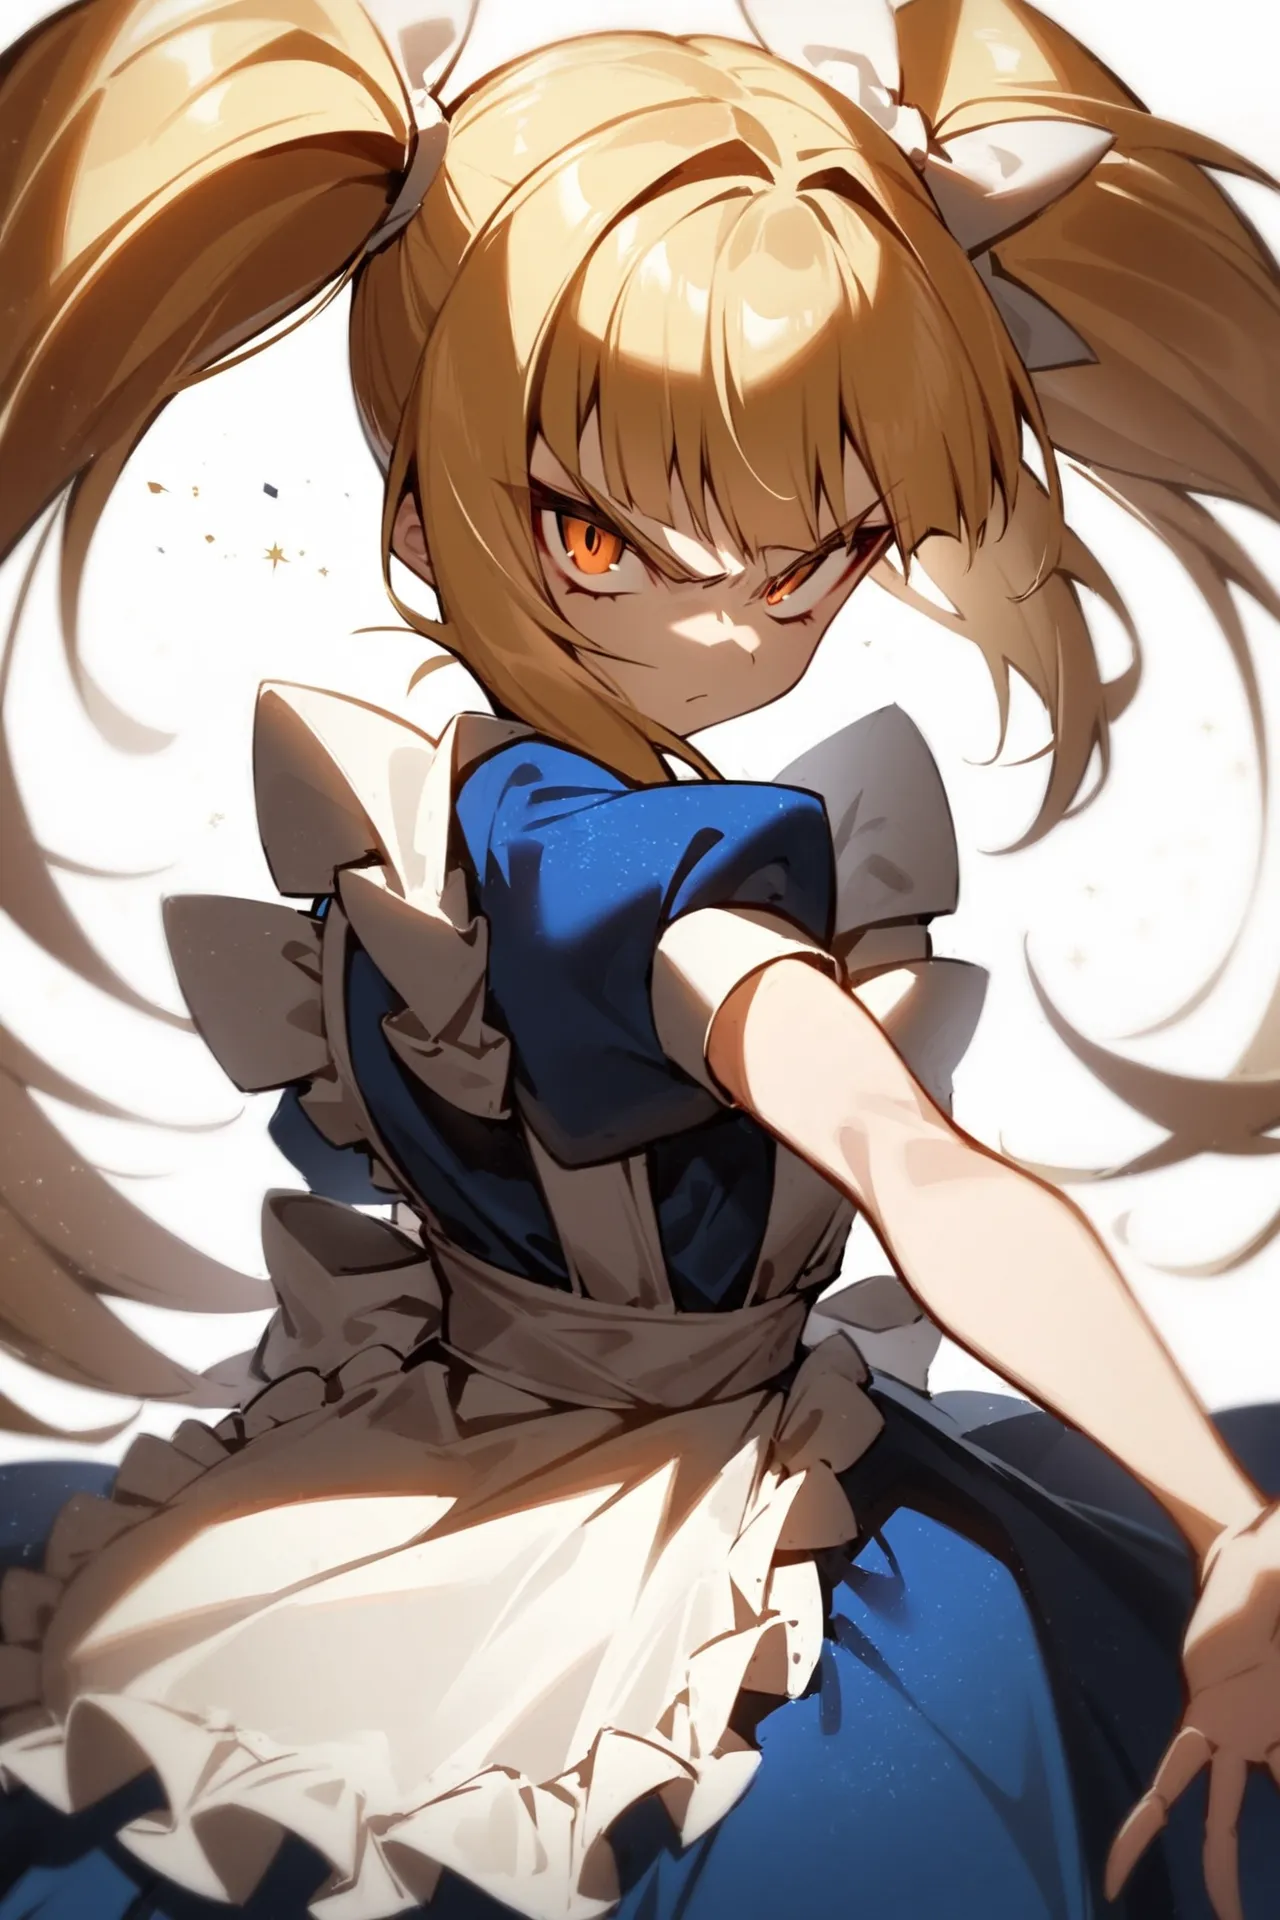 '1girl, glaring,\nblonde hair, twintails, blue dress, white apron,\nwhite background,\nAlice in glitterworld\nNegative prompt: (worst quality, low quality:1.4), nsfw\nSteps: 35, Sampler: DPM++ 2M SDE Karras, CFG scale: 7, Seed: 1, Size: 640x960, Model hash: 642b08ca49, Model: ConfusionXL2.0_fp16_vae, VAE hash: 63aeecb90f, VAE: sdxl_vae_0.9.safetensors, Denoising strength: 0.6, Clip skip: 2, Hires upscale: 2, Hires steps: 15, Hires upscaler: ESRGAN_4x, Eta: 0.68, Version: v1.7.0'